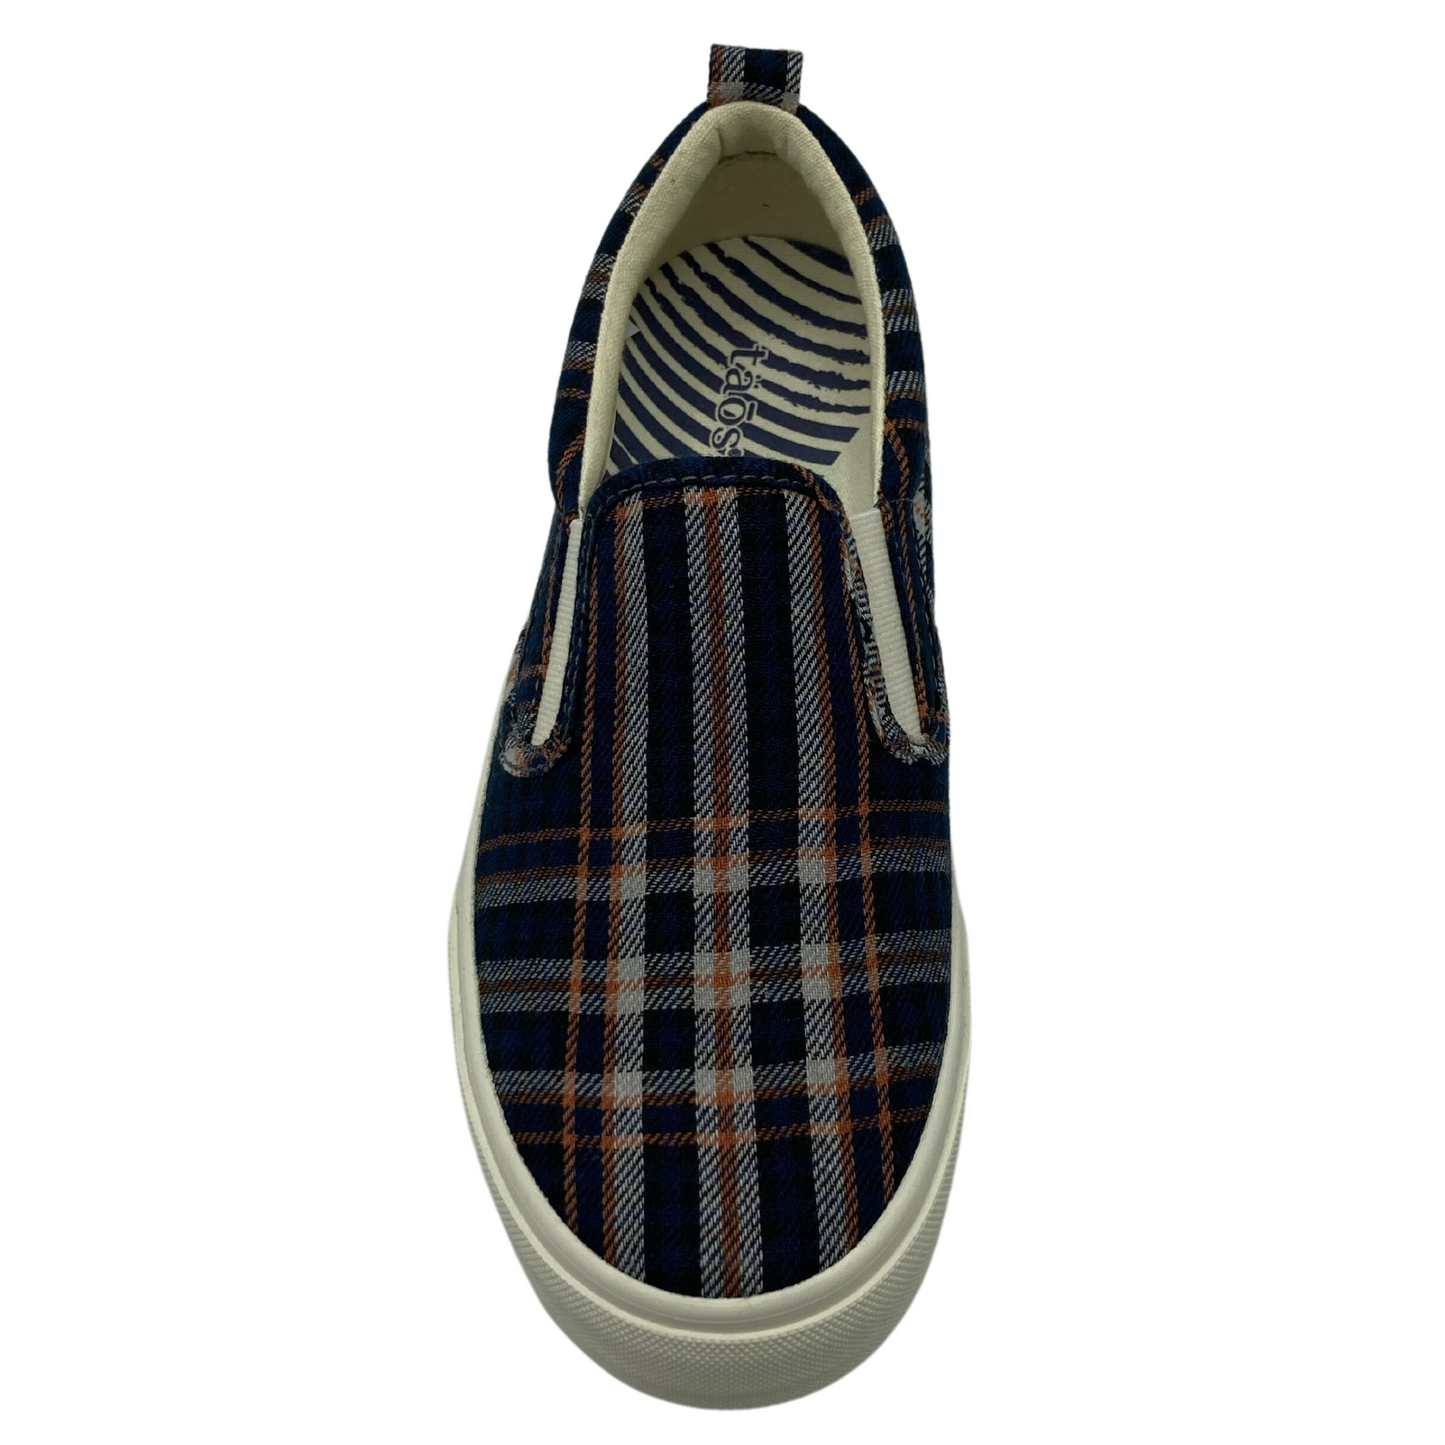 Top view of blue plaid slip on shoe with white rubber sole and pull-on tab